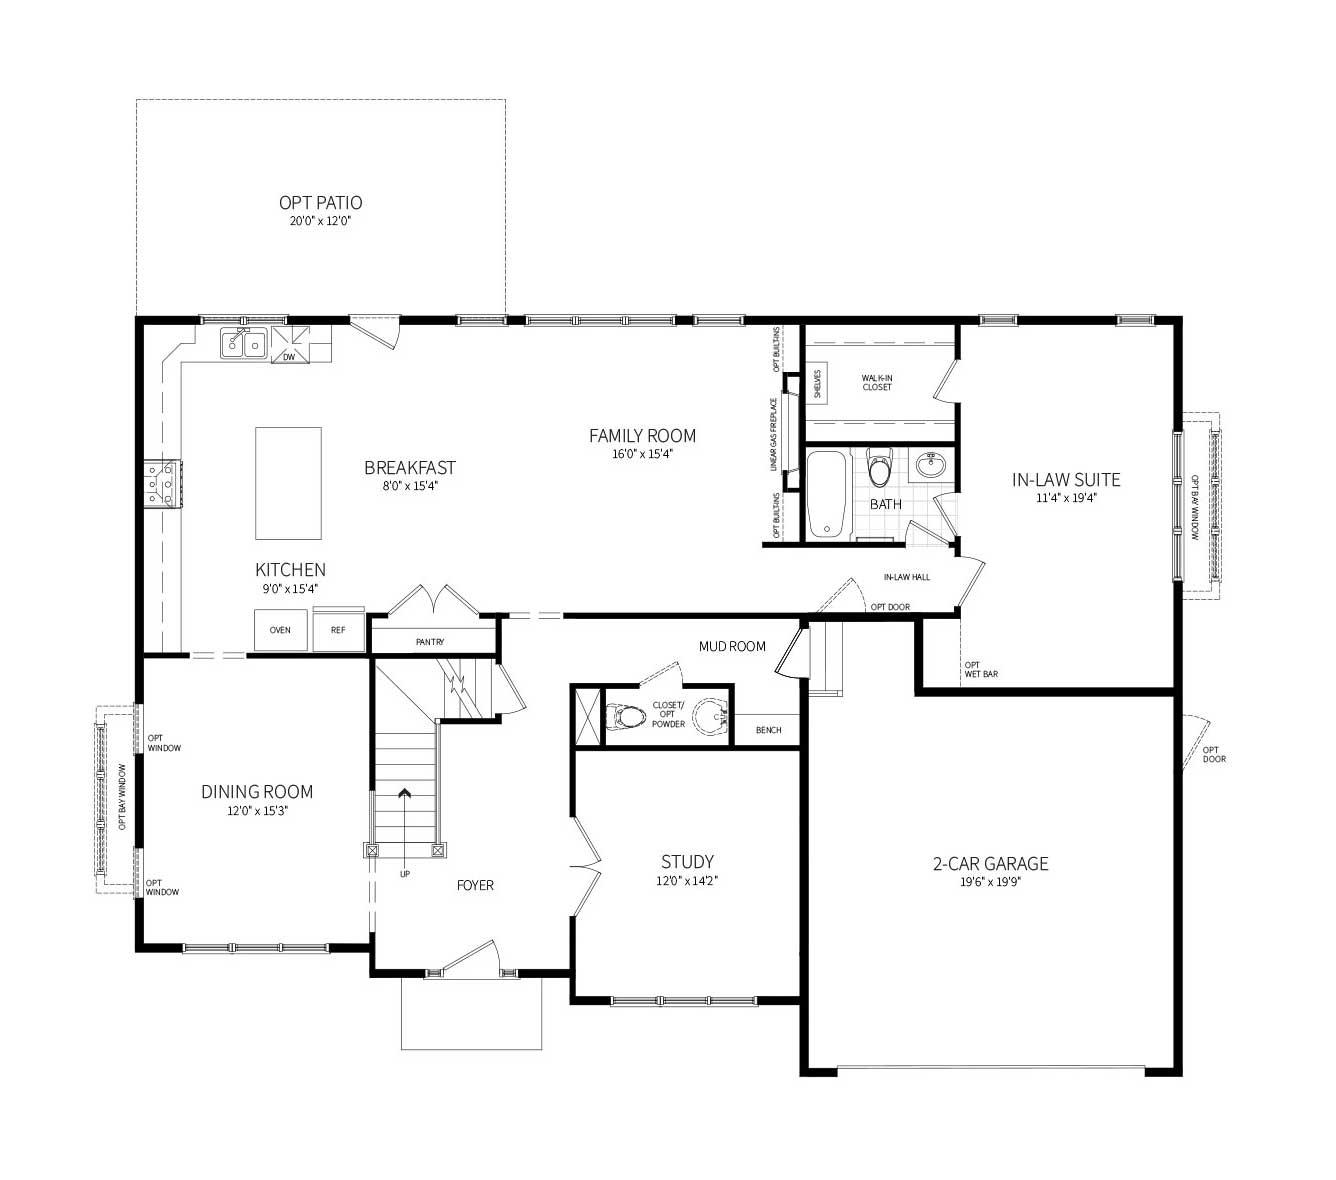 The first floor plan of the home proposed for 15426 Quince Orchard rd, featuring an In-Law Suite with Bath.